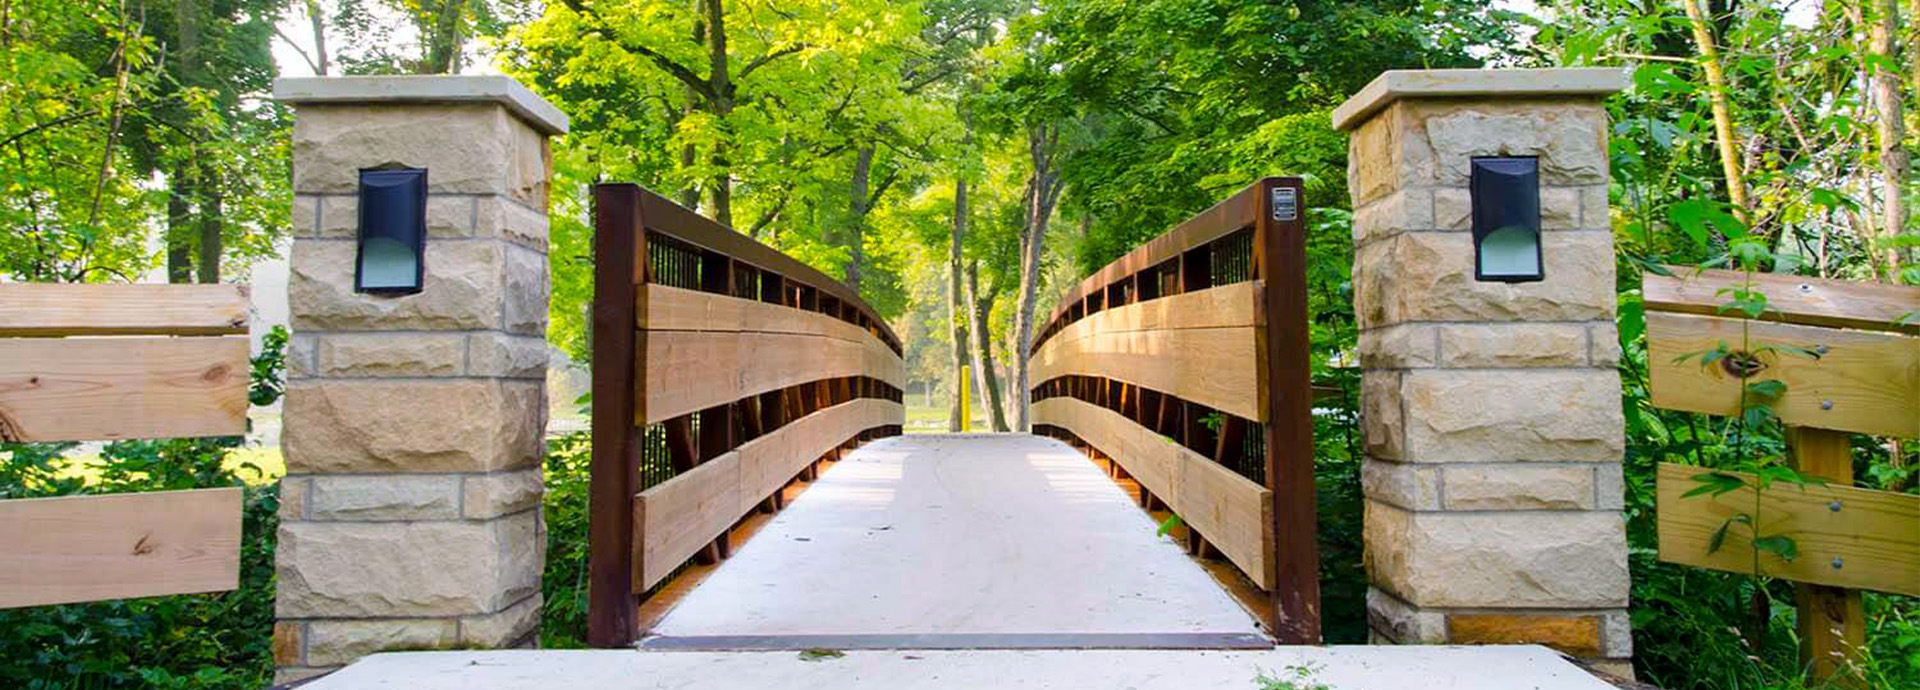 Slideshow Image - A rustic wooden bridge surrounded by lush greenery